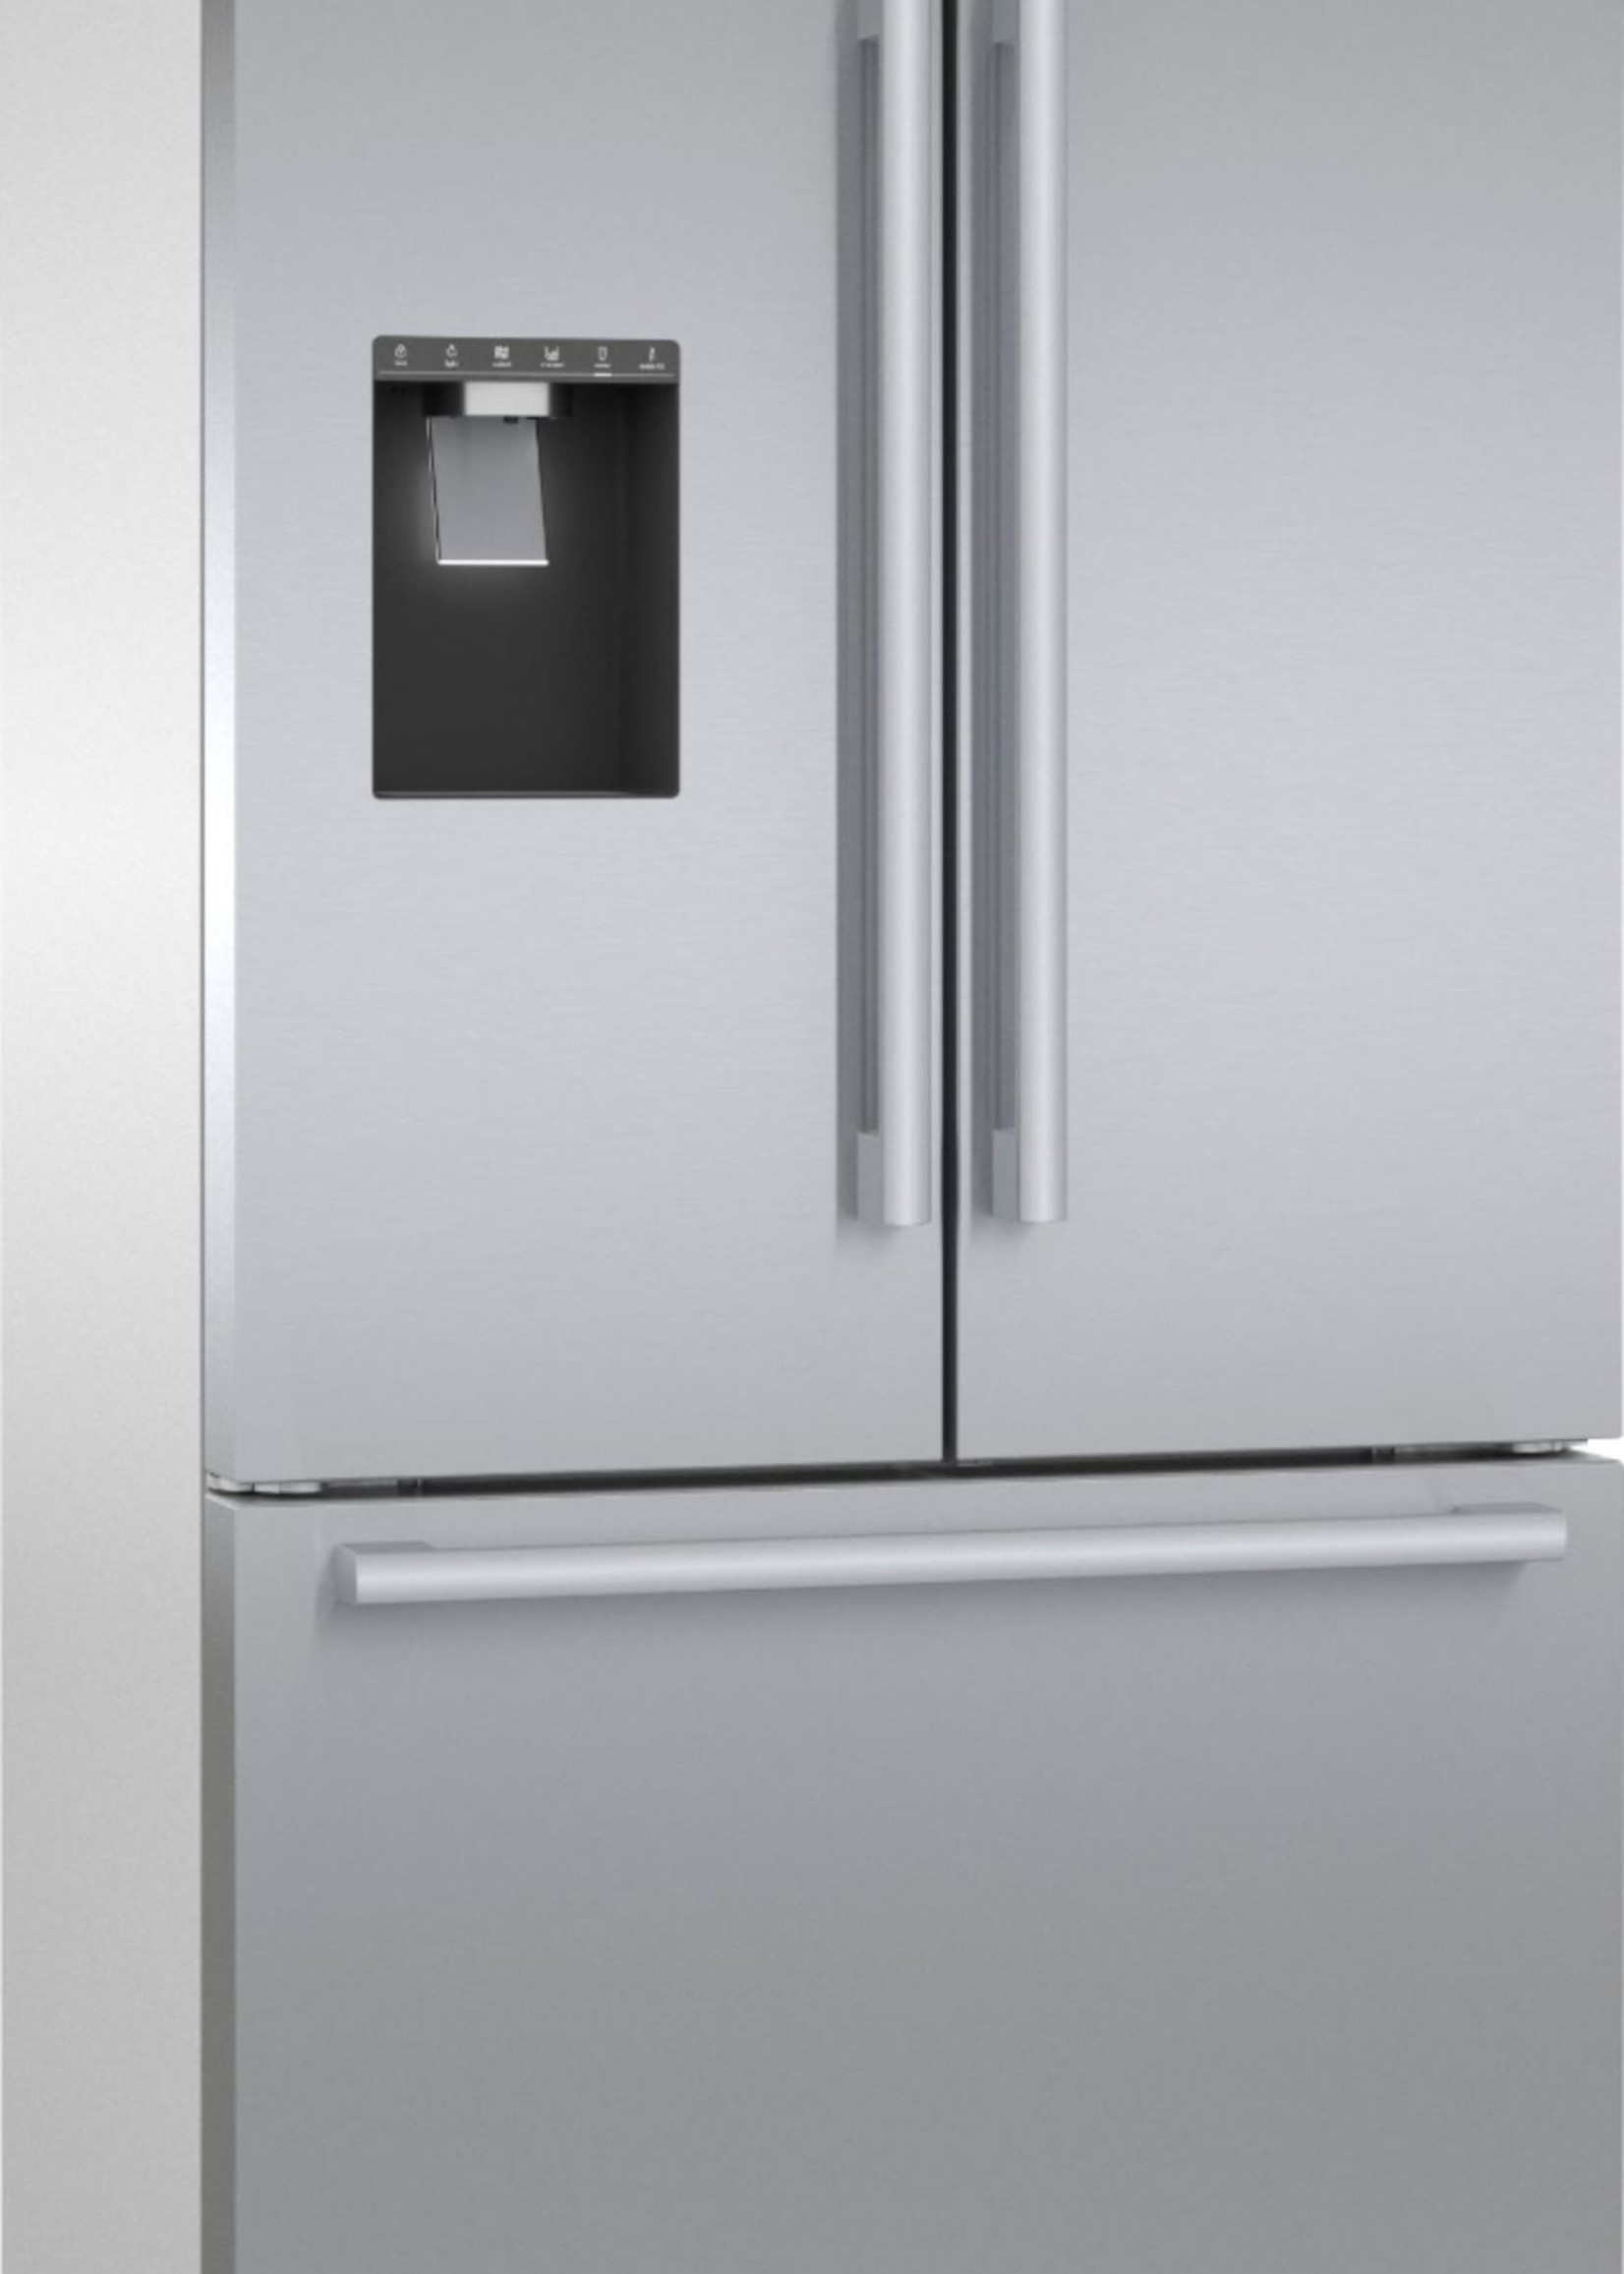 *Bosch B36CD50SNS  - 500 Series 21 Cu. Ft. French Door Counter-Depth Smart Refrigerator with External Water and Ice Maker - Stainless steel